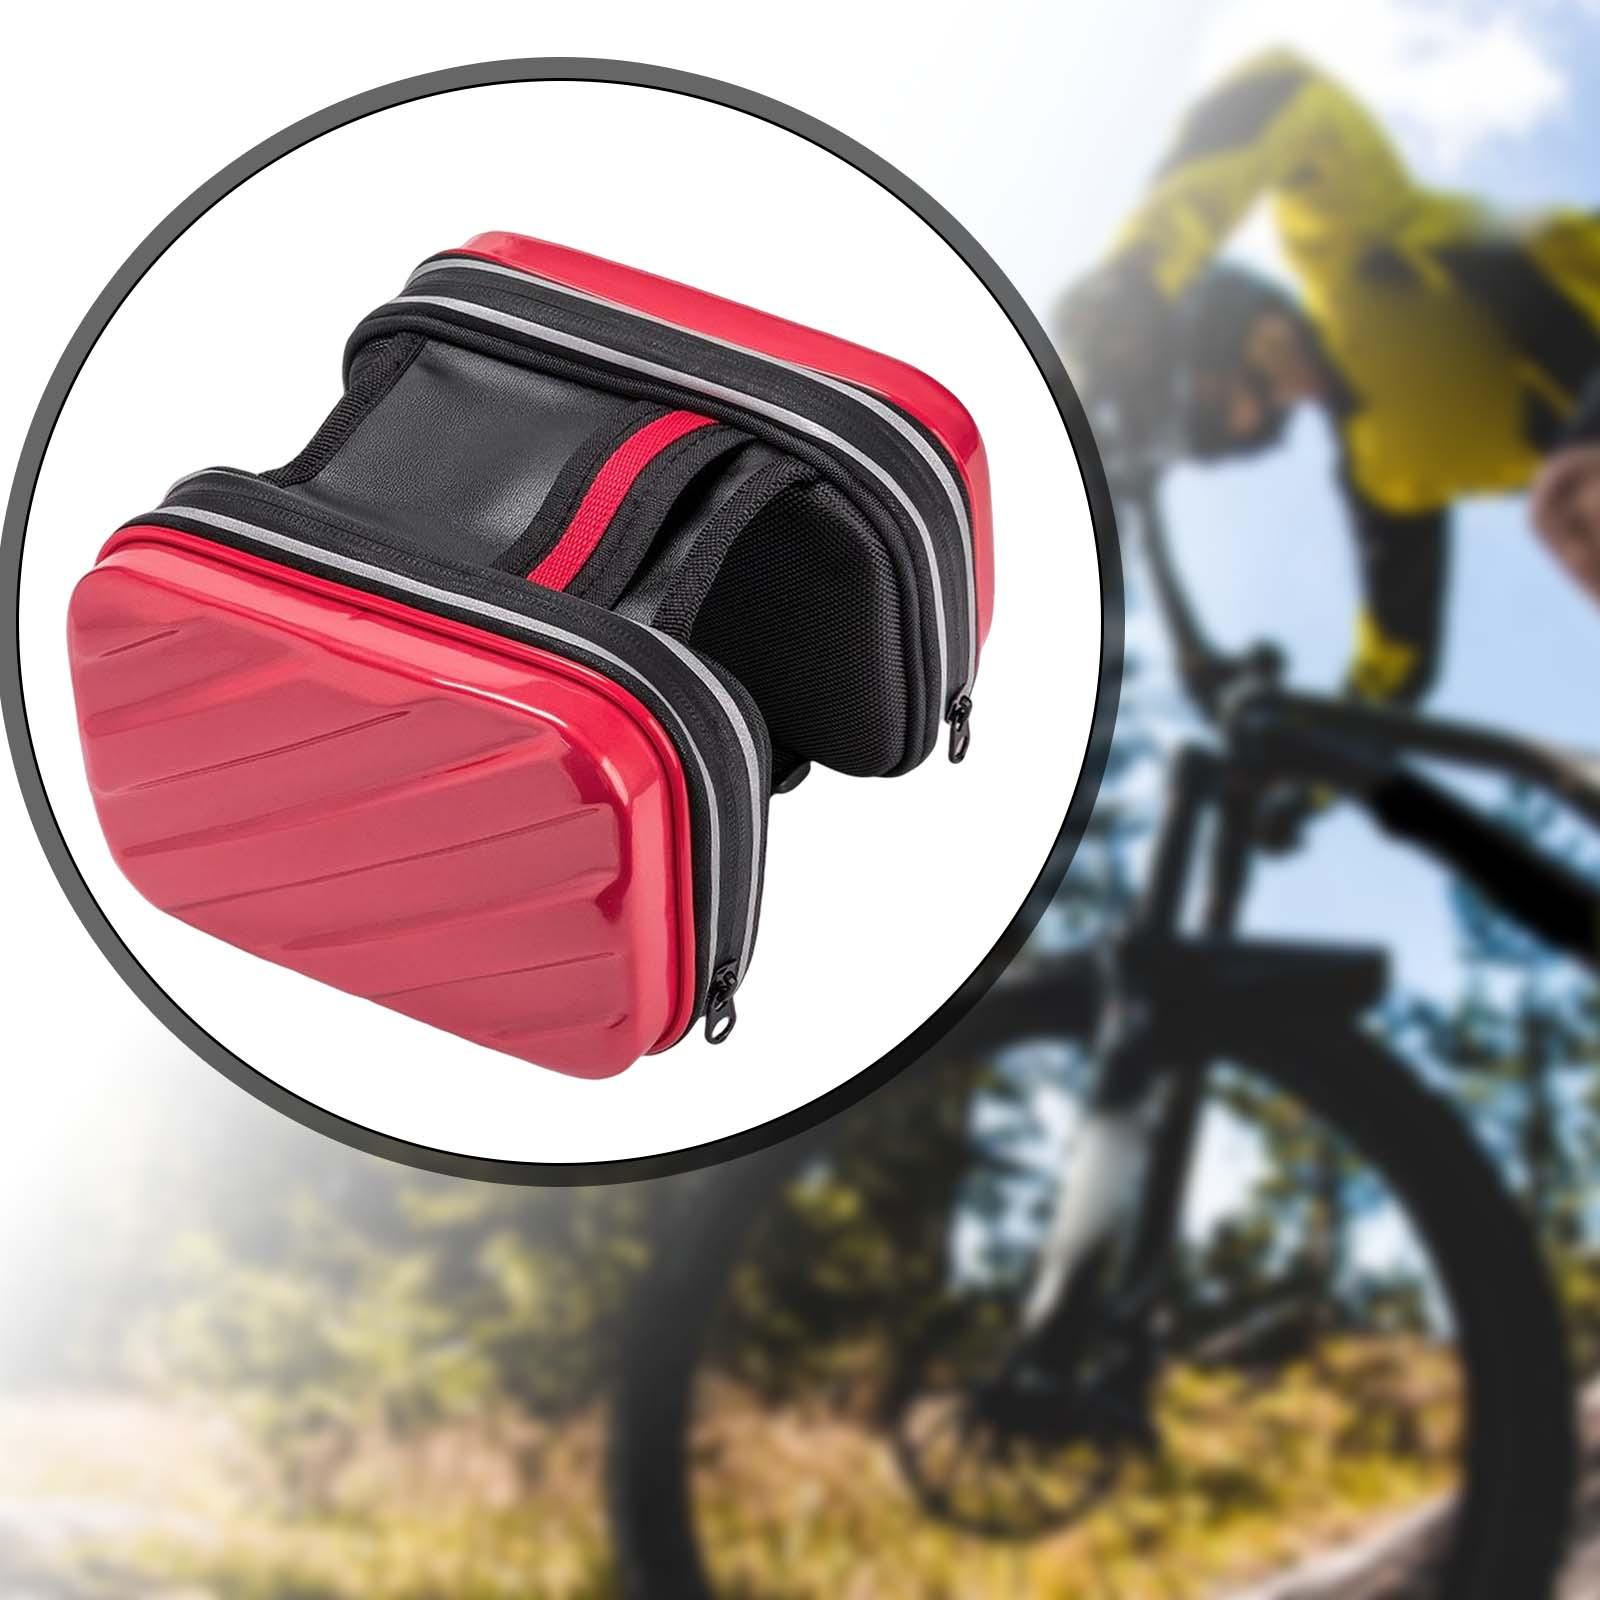 Hard Shell Bike Frame Front Bag Large Capacity for Keys Small Tools Storage Red